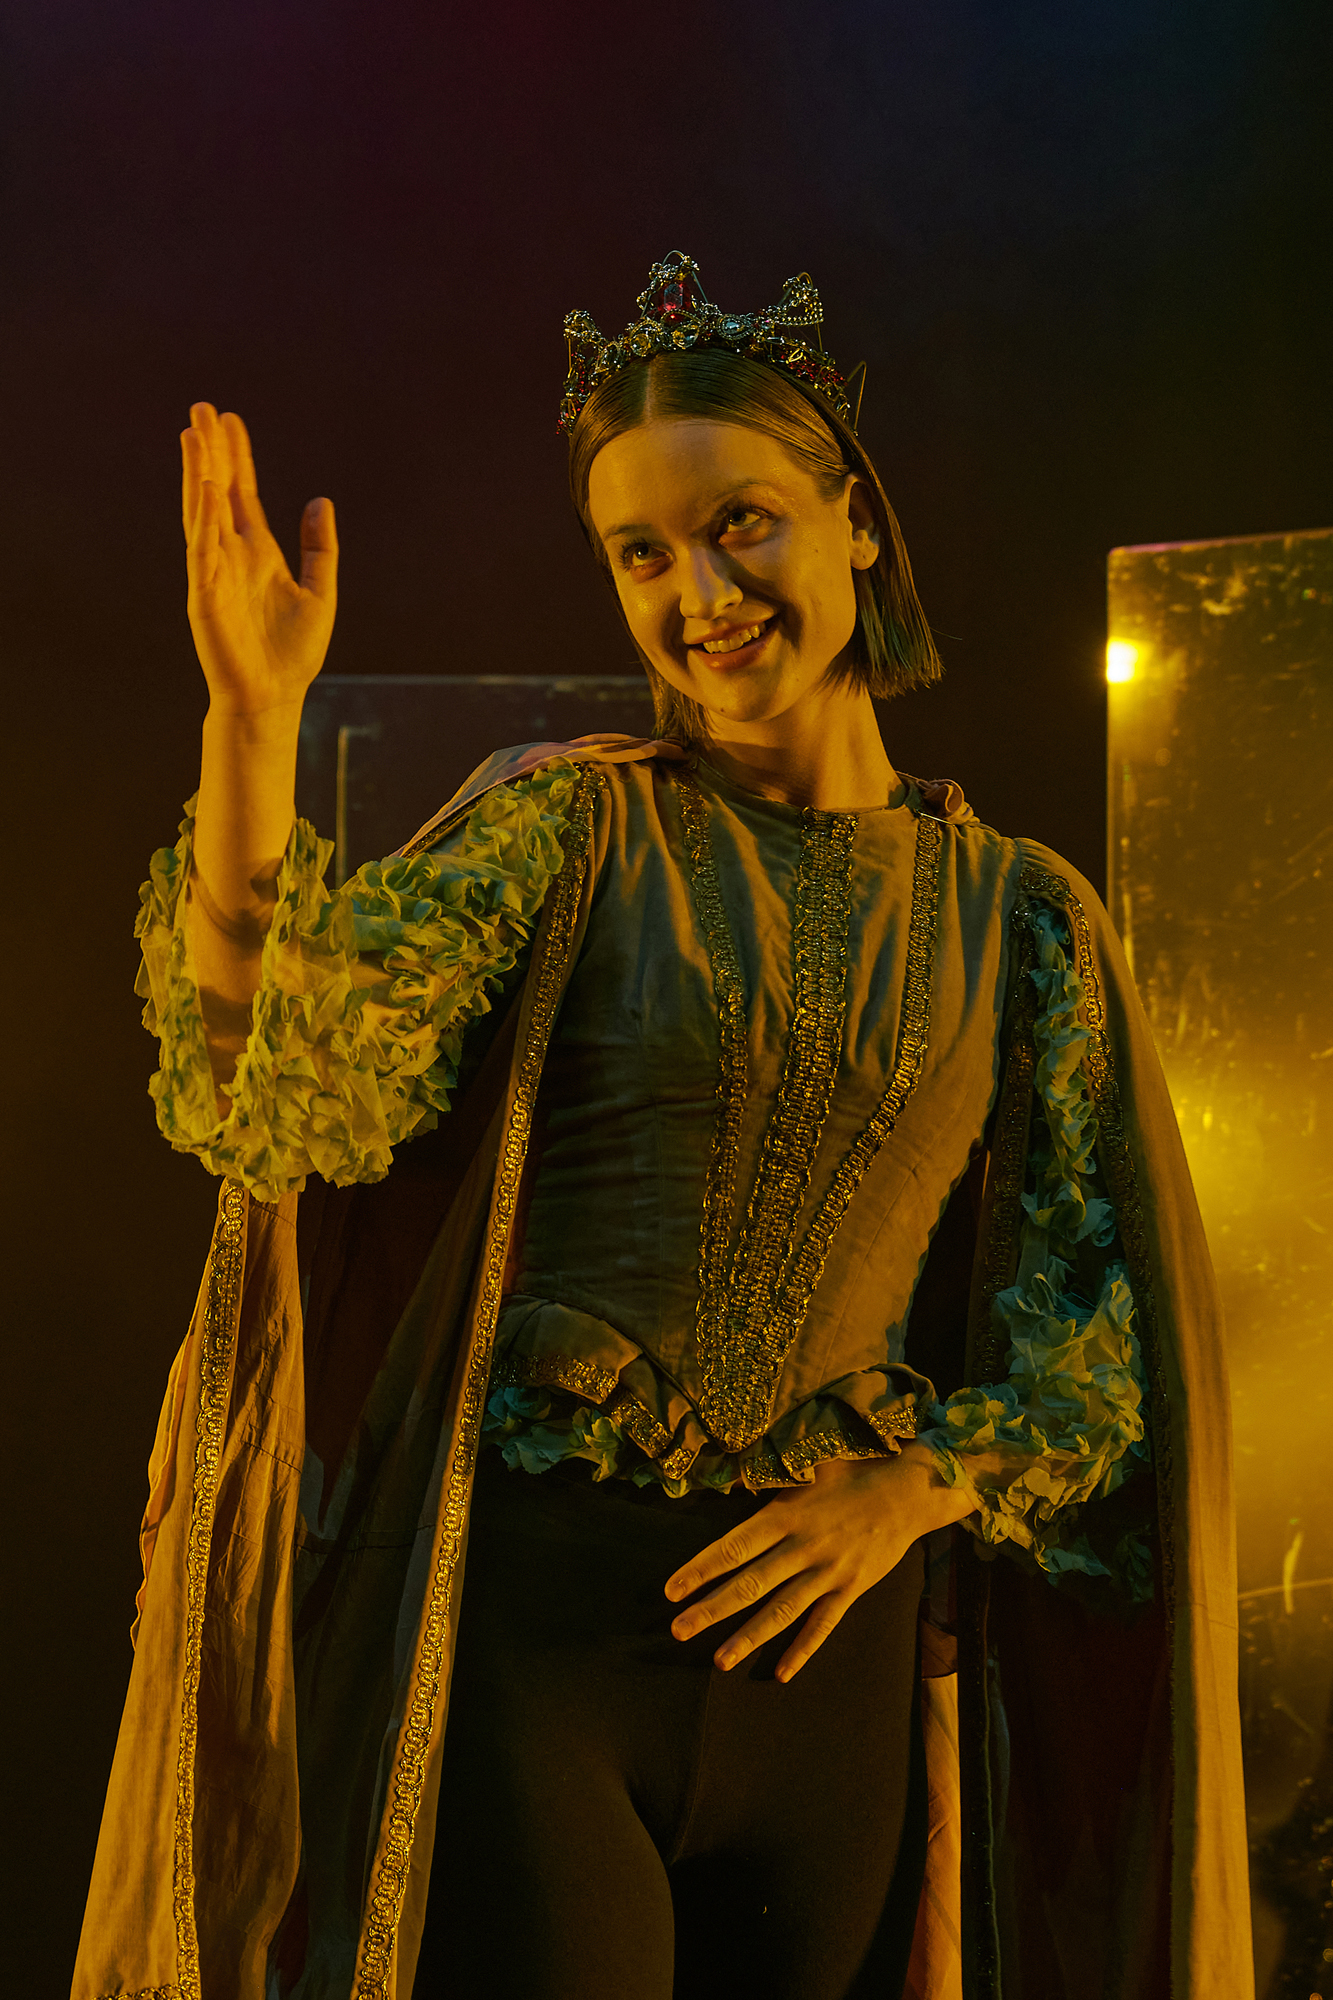 A photo of the character of Tintomara. She has a brunette page haircut and a crown. She is wearing a doublet with gold details. From the long sleeves hanging open, the sleeves of a sheer top with turqouise organza flowers peek out. Over her shoulders is a pink cape and on her lower half she wears black yoga pants. She is lit in golden yellow and is waving to someone out of frame. 